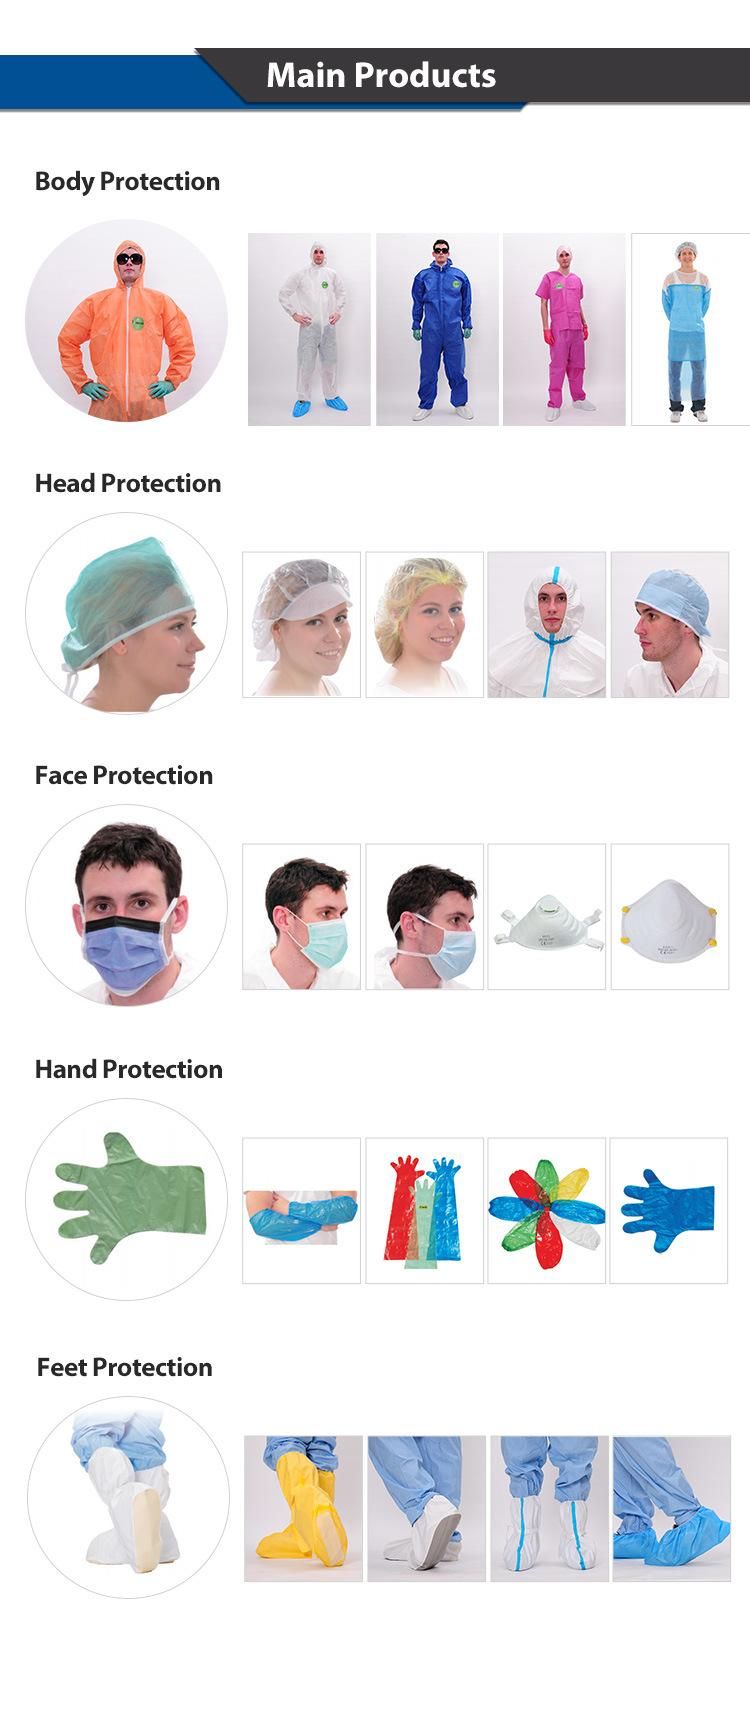 Protective Surgical Medical Face Mask, Doctor/Prime; S Mask, Surgical Mask, Bef 99mask, 3-Ply Face Mask with Earloop with Typiir En 14683 CE Standard